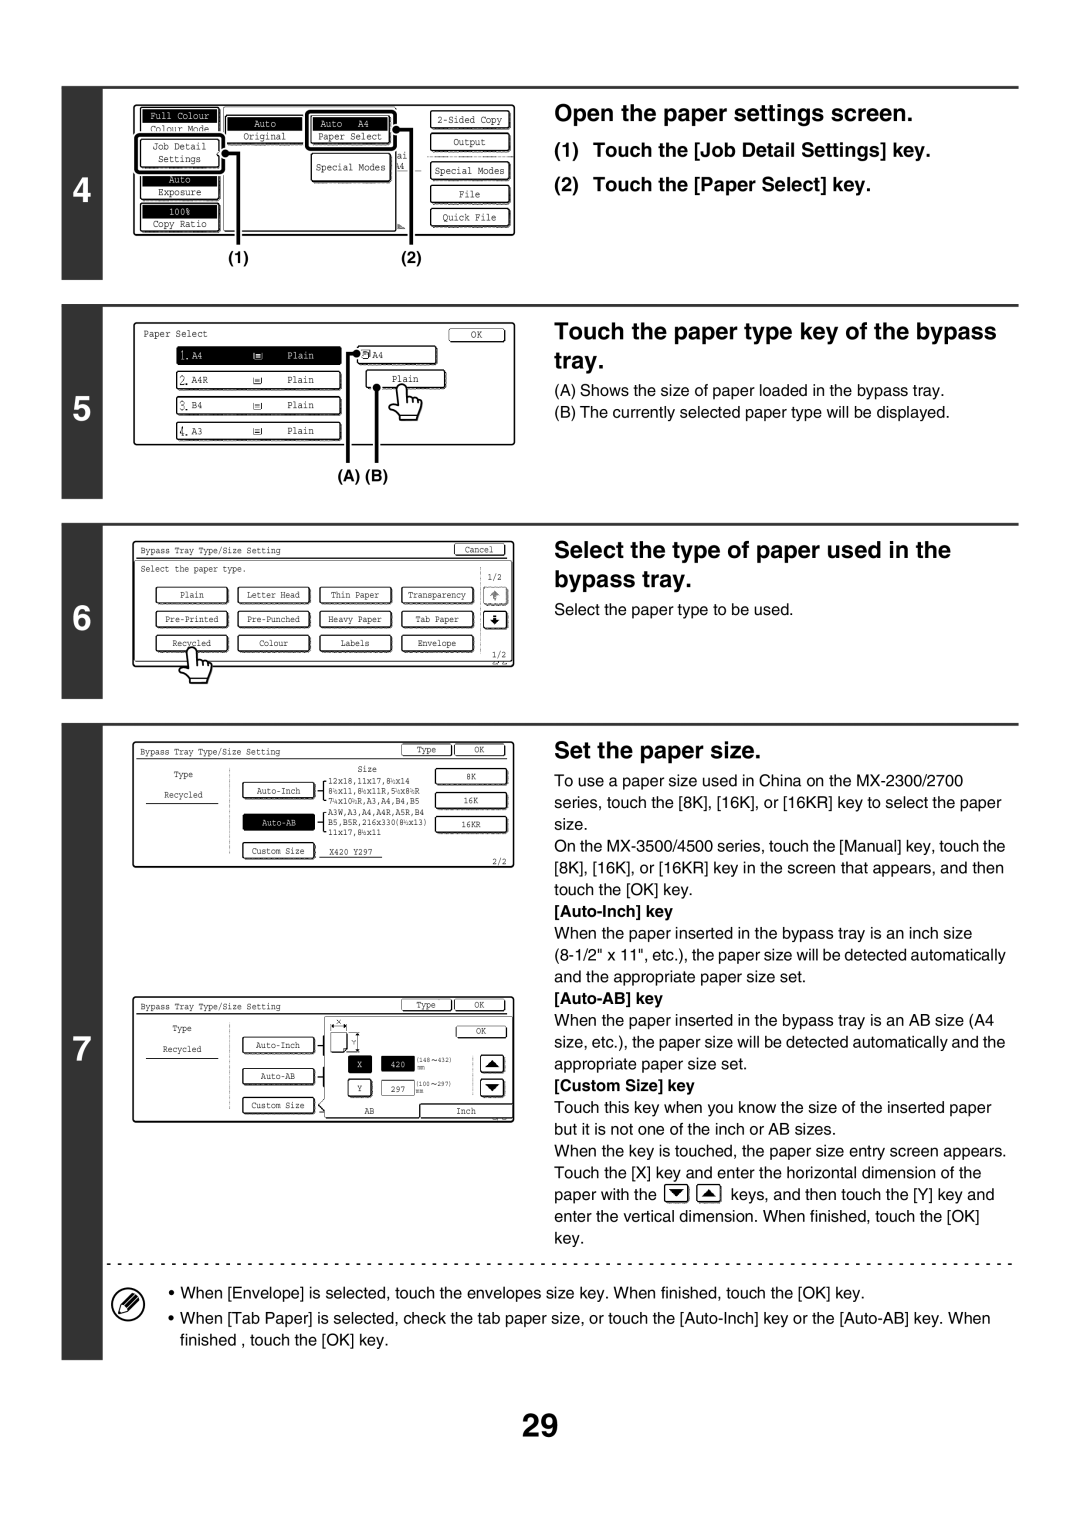 Sharp MX-3500N manual Open the paper settings screen, Touch the paper type key of the bypass tray, Set the paper size 